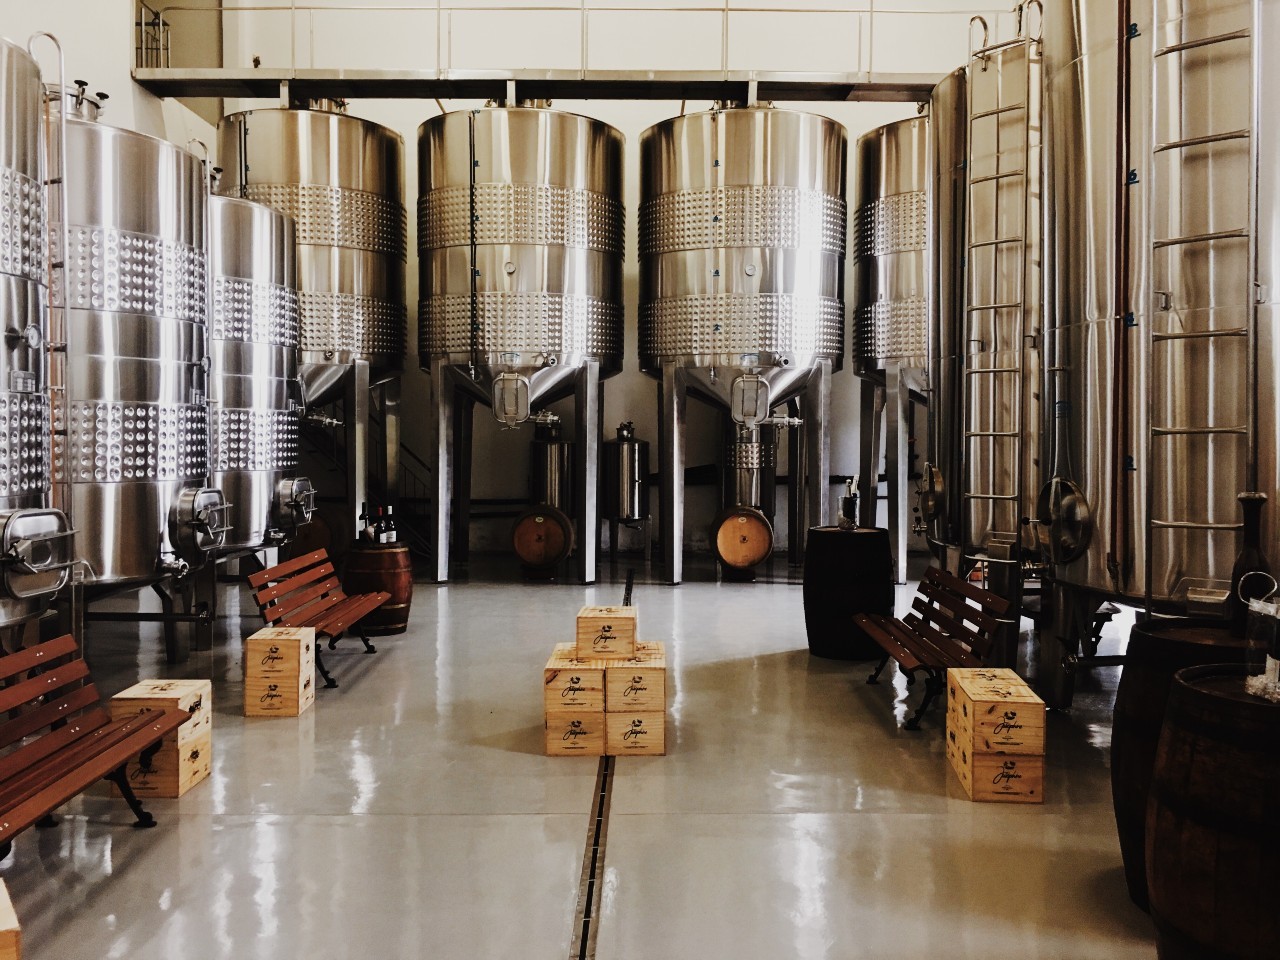 Fermentation tanks and barrels in beer brewing warehouse